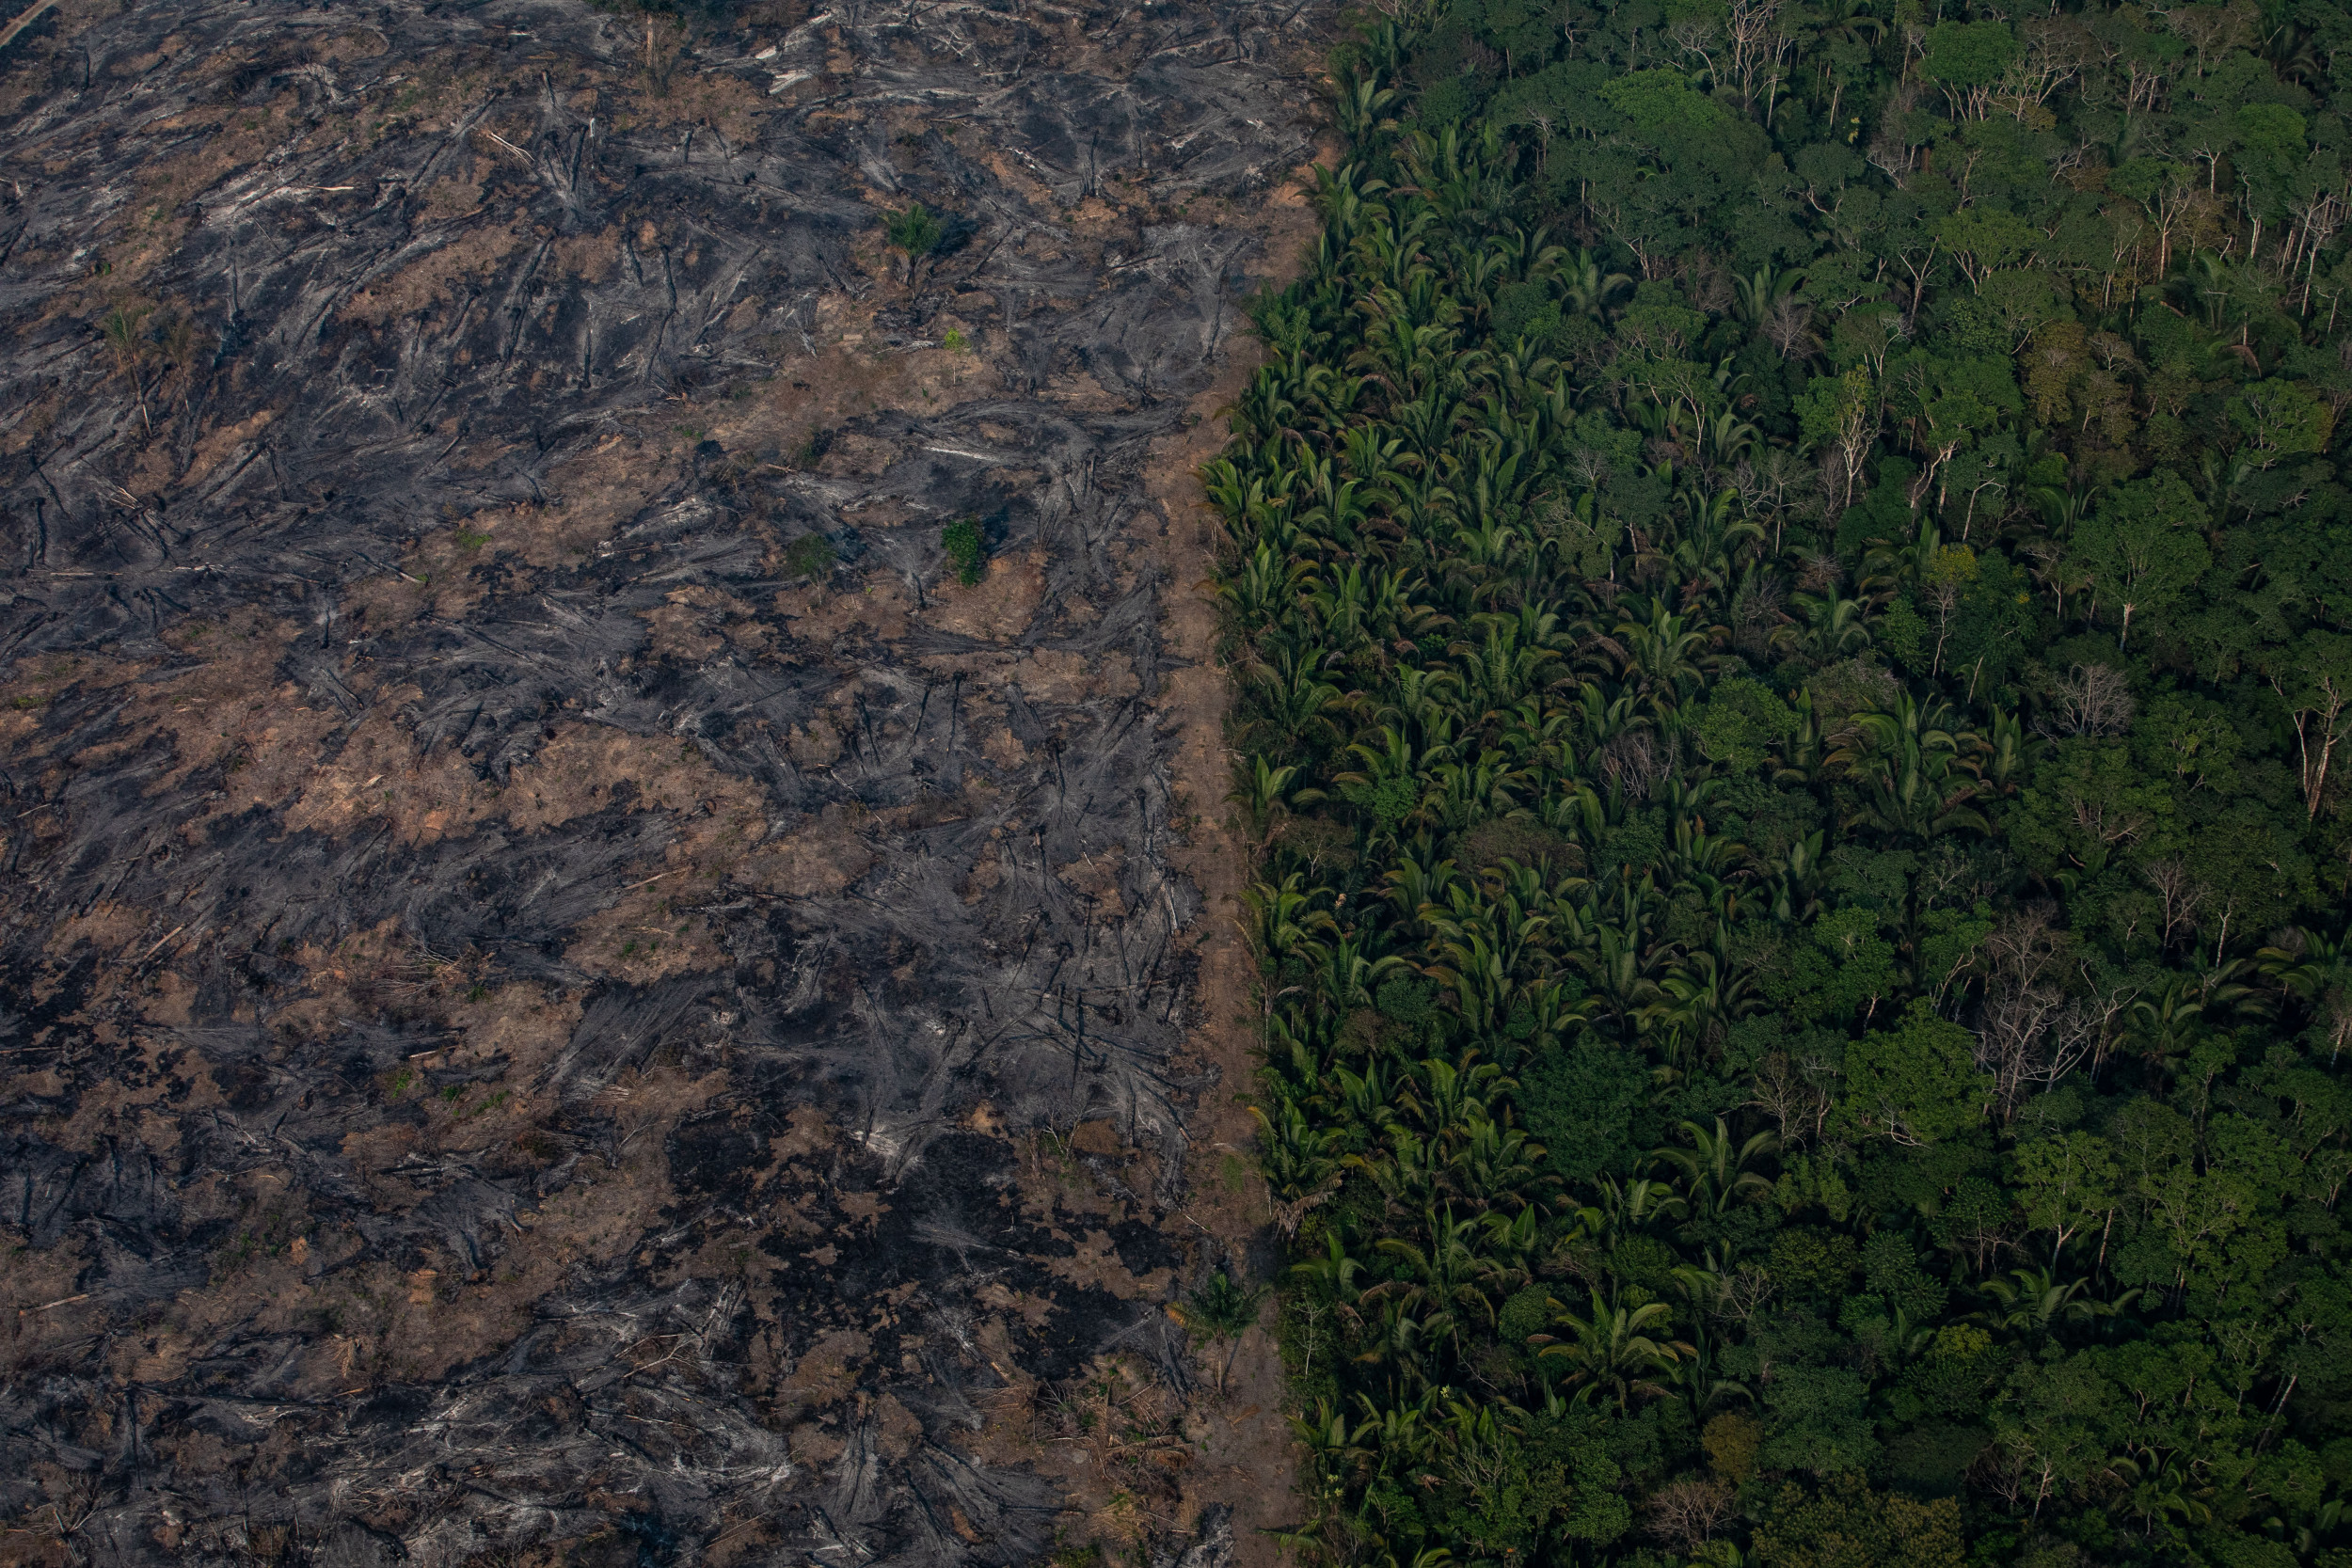 Climate Change Could Intensify Amazon Forest Fires, Turning It From a Carbon Sink to Source, Scientists Warn - Newsweek